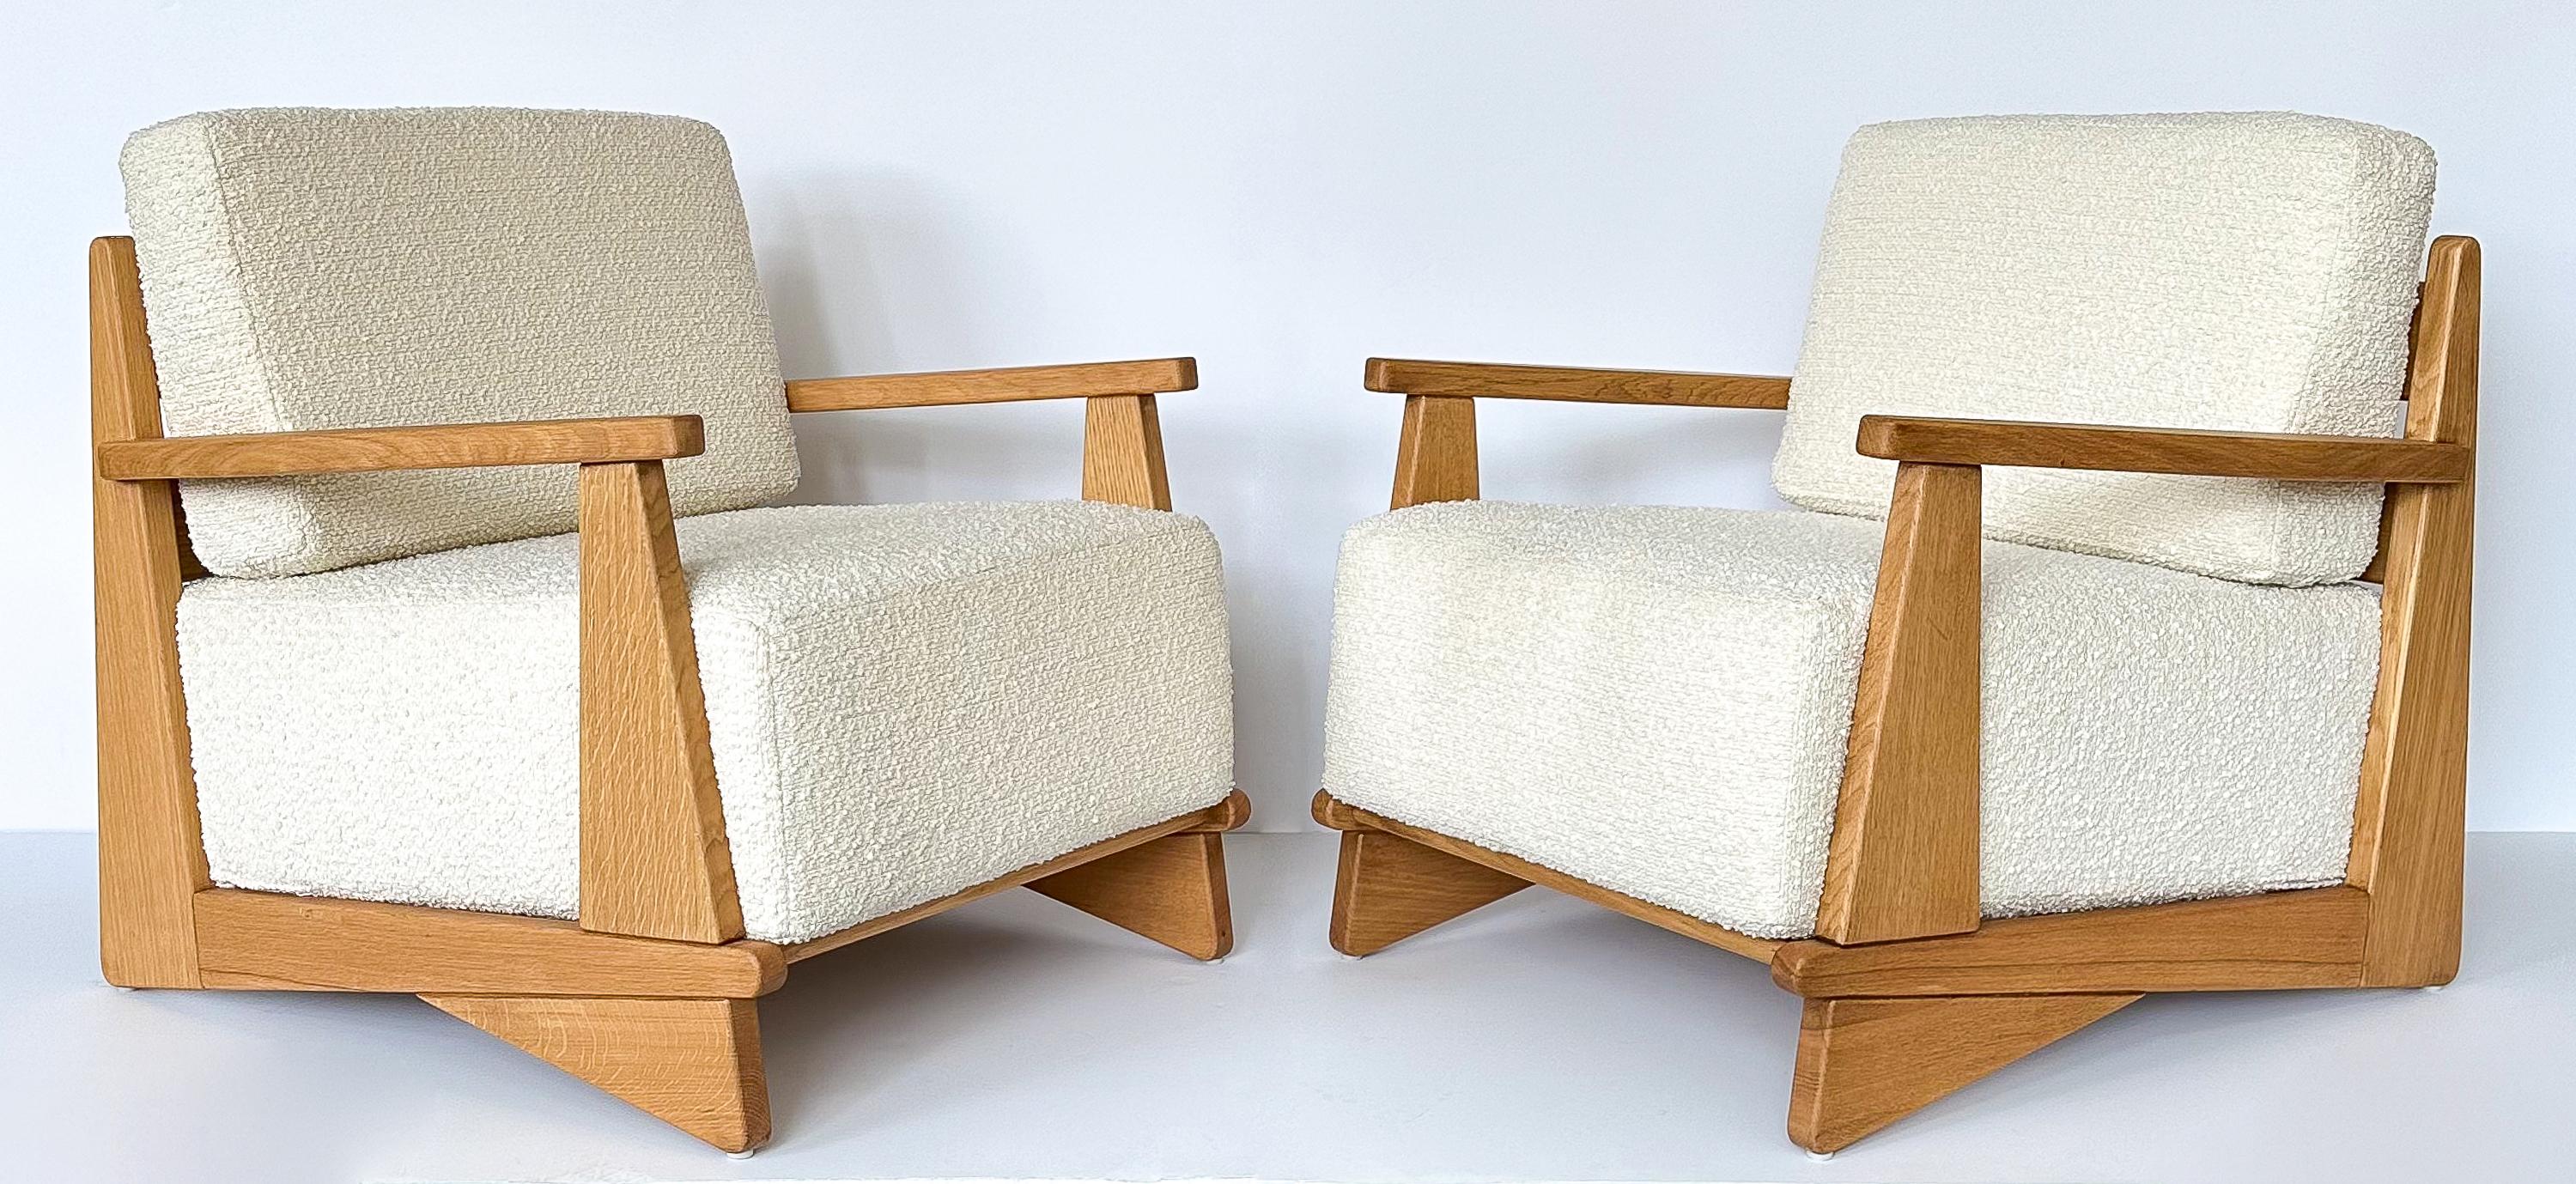 Discover the timeless elegance and exceptional quality of this pair of lounge chairs by Maison Regain, the renowned French furniture atelier. Originating from the Haute-Alpes region of France, an area abundant with elm trees, Maison Regain created